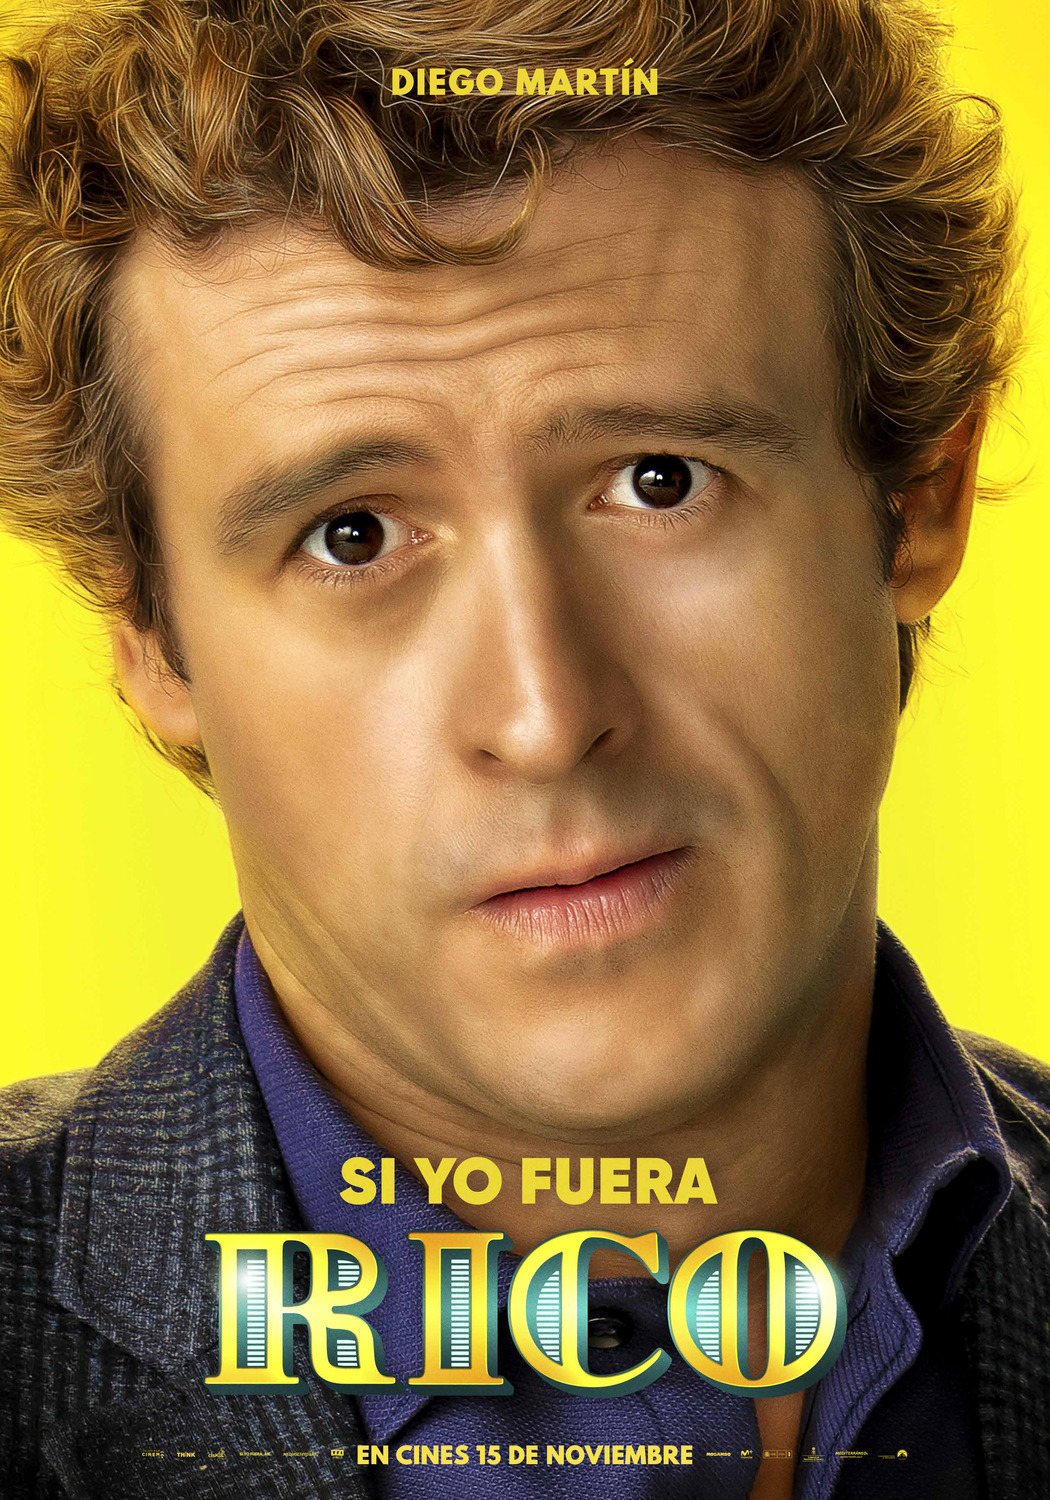 Extra Large Movie Poster Image for Si yo fuera rico (#6 of 9)